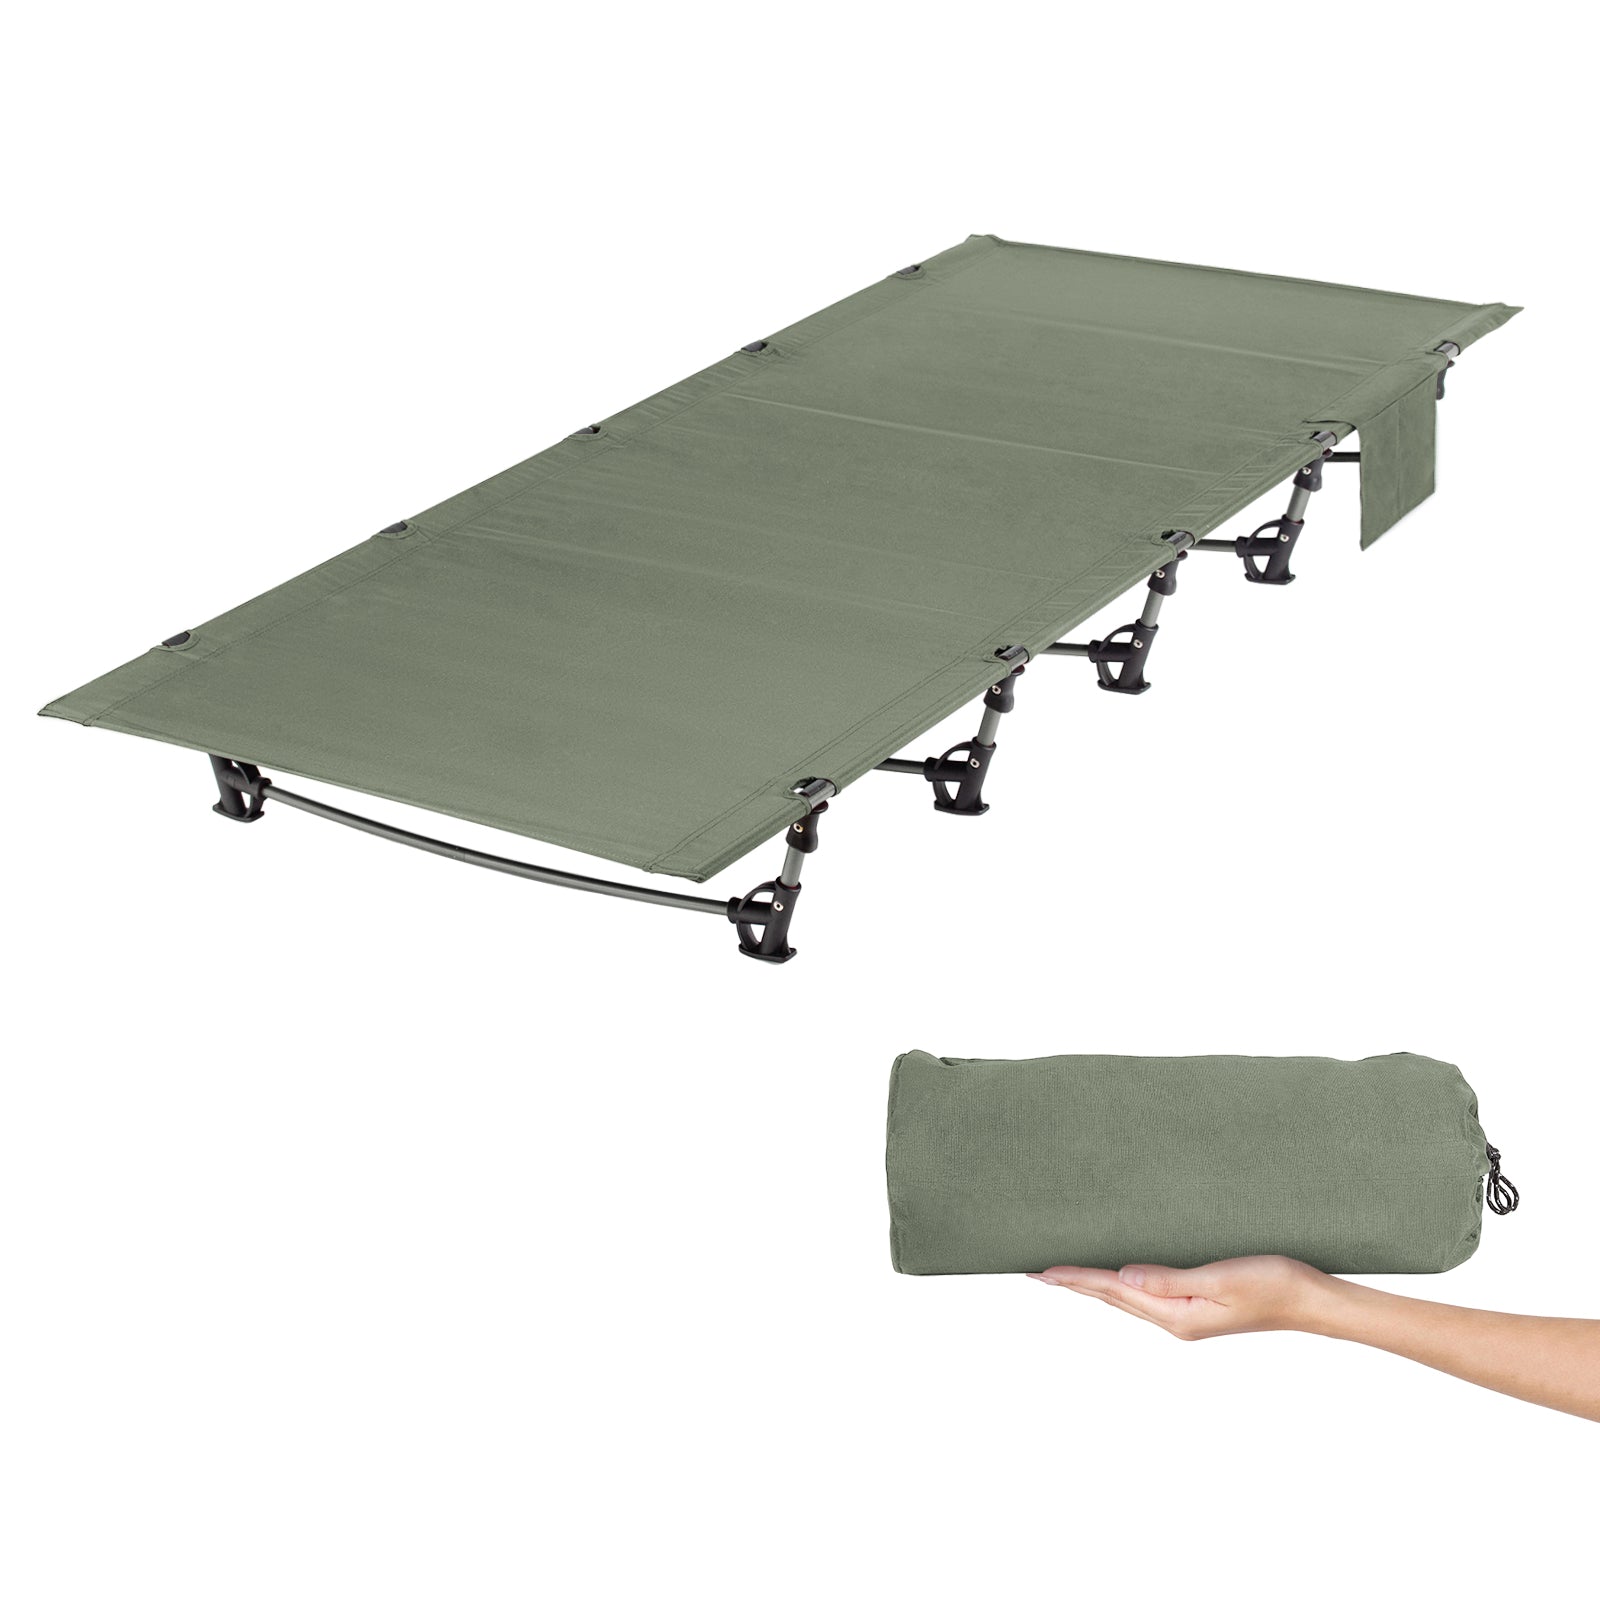 Leogreen-Foldable-Camp-Bed-Ultra-Lightweight-Compact-Strong-and-Durable-192-x-70-x-17cm-for-Tents-Outdoor-Hiking-Traveling-Maximum-Load-150kg-Dark-Green